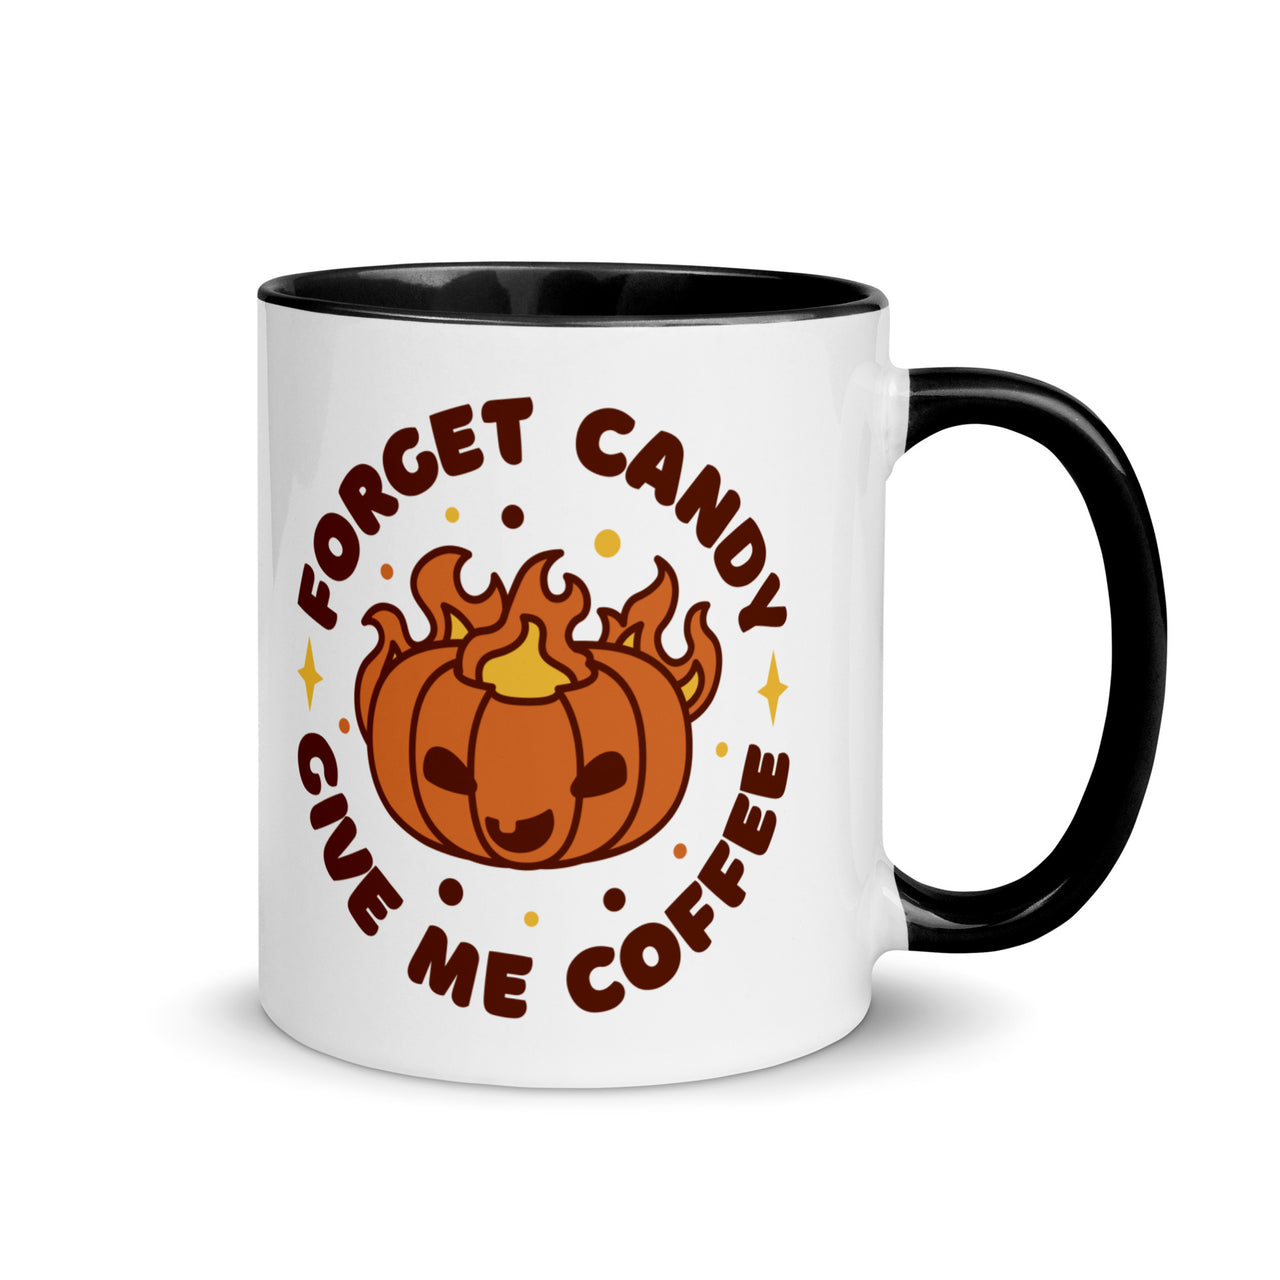 Forget Candy Give Me Coffee Mug with Colored Handle